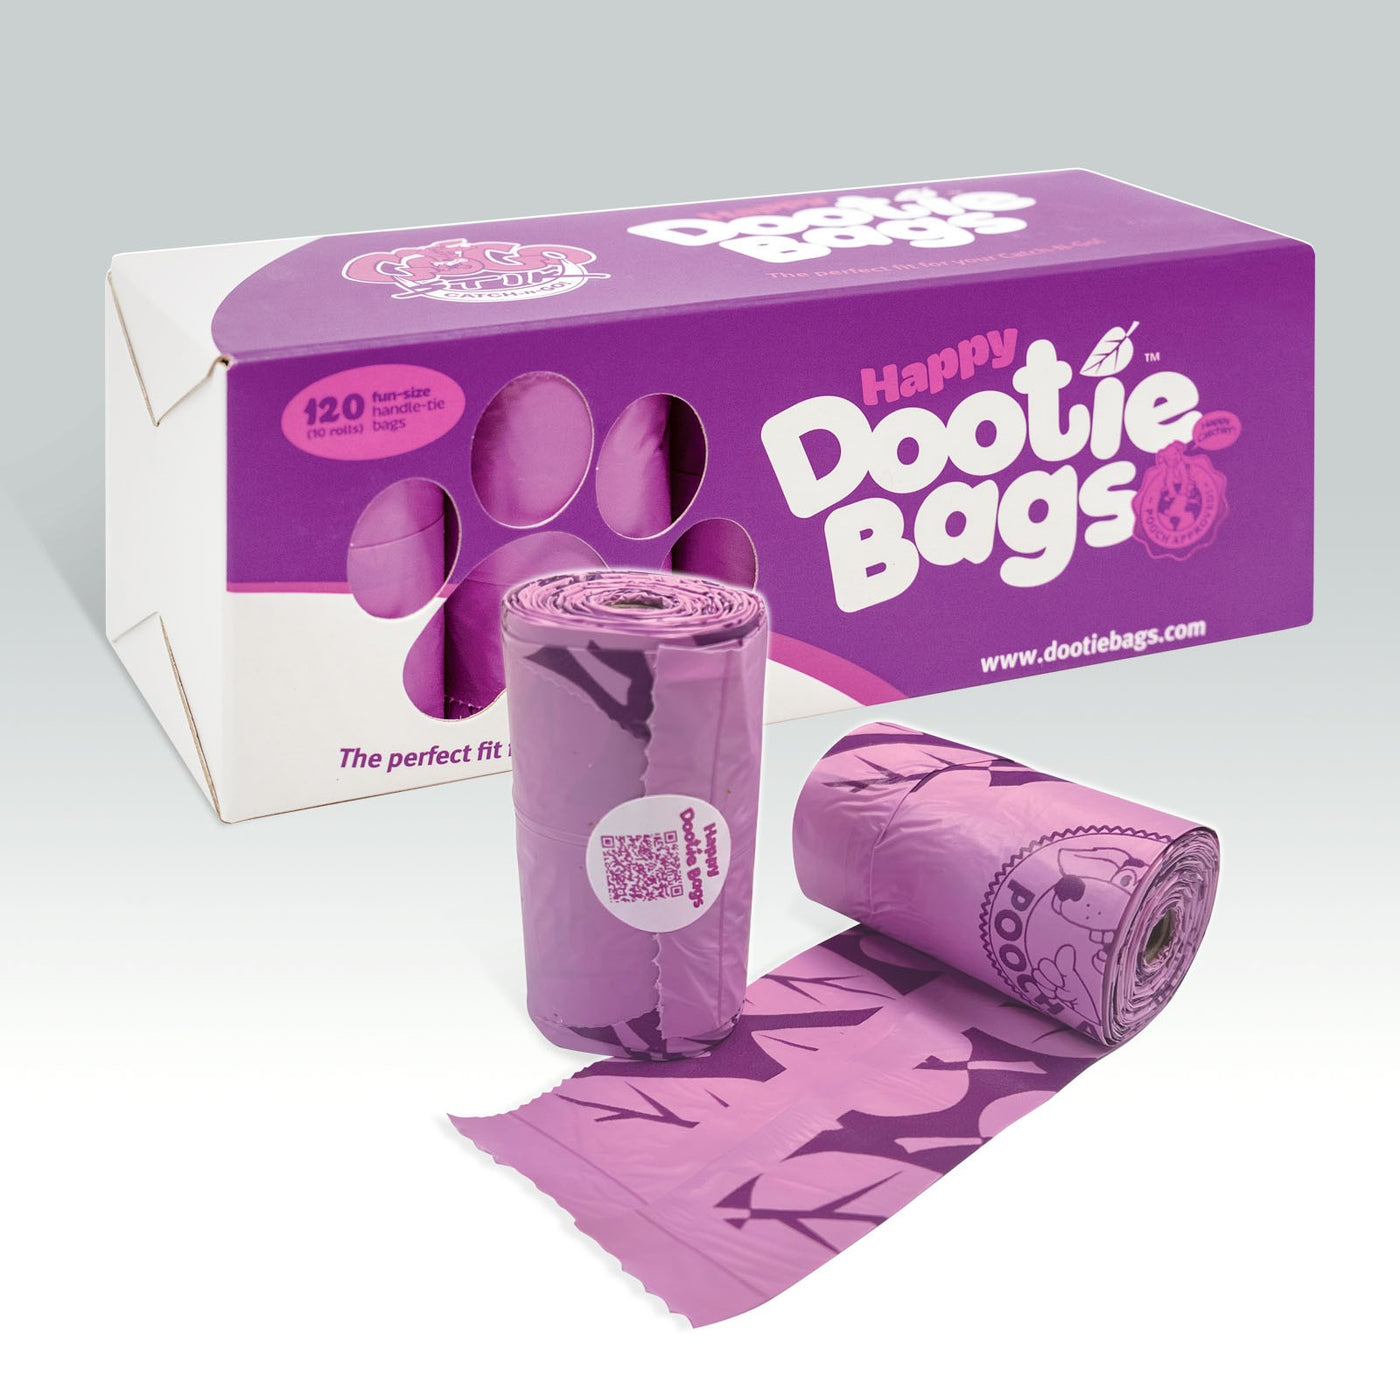 Happy Dootie Bags® Medium Pet Poop Bags, 12 Count Rolls Easy Tie Handles for Roll Dispensers. Strong, Leakproof. Made with Corn Starch. Convenient for Walks. Fits GoGo Stik Catch N Go Pooper Scoopers.